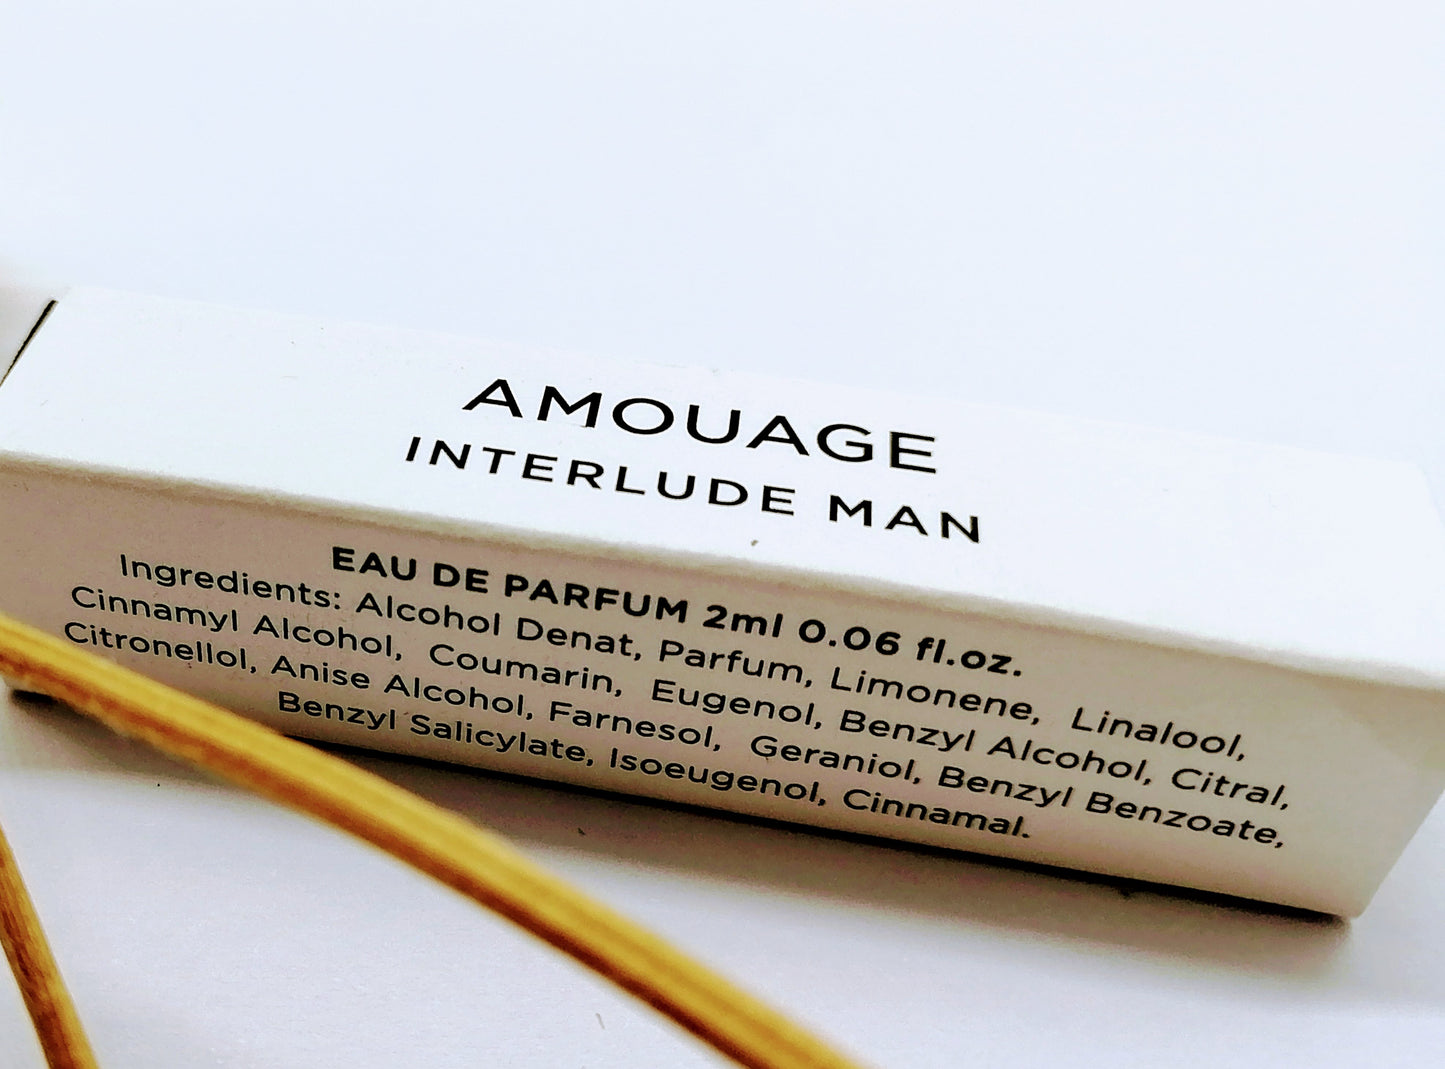 AMOUAGE INTERLUDE MAN Fragrance Sample Vial Spray New Factory Sealed